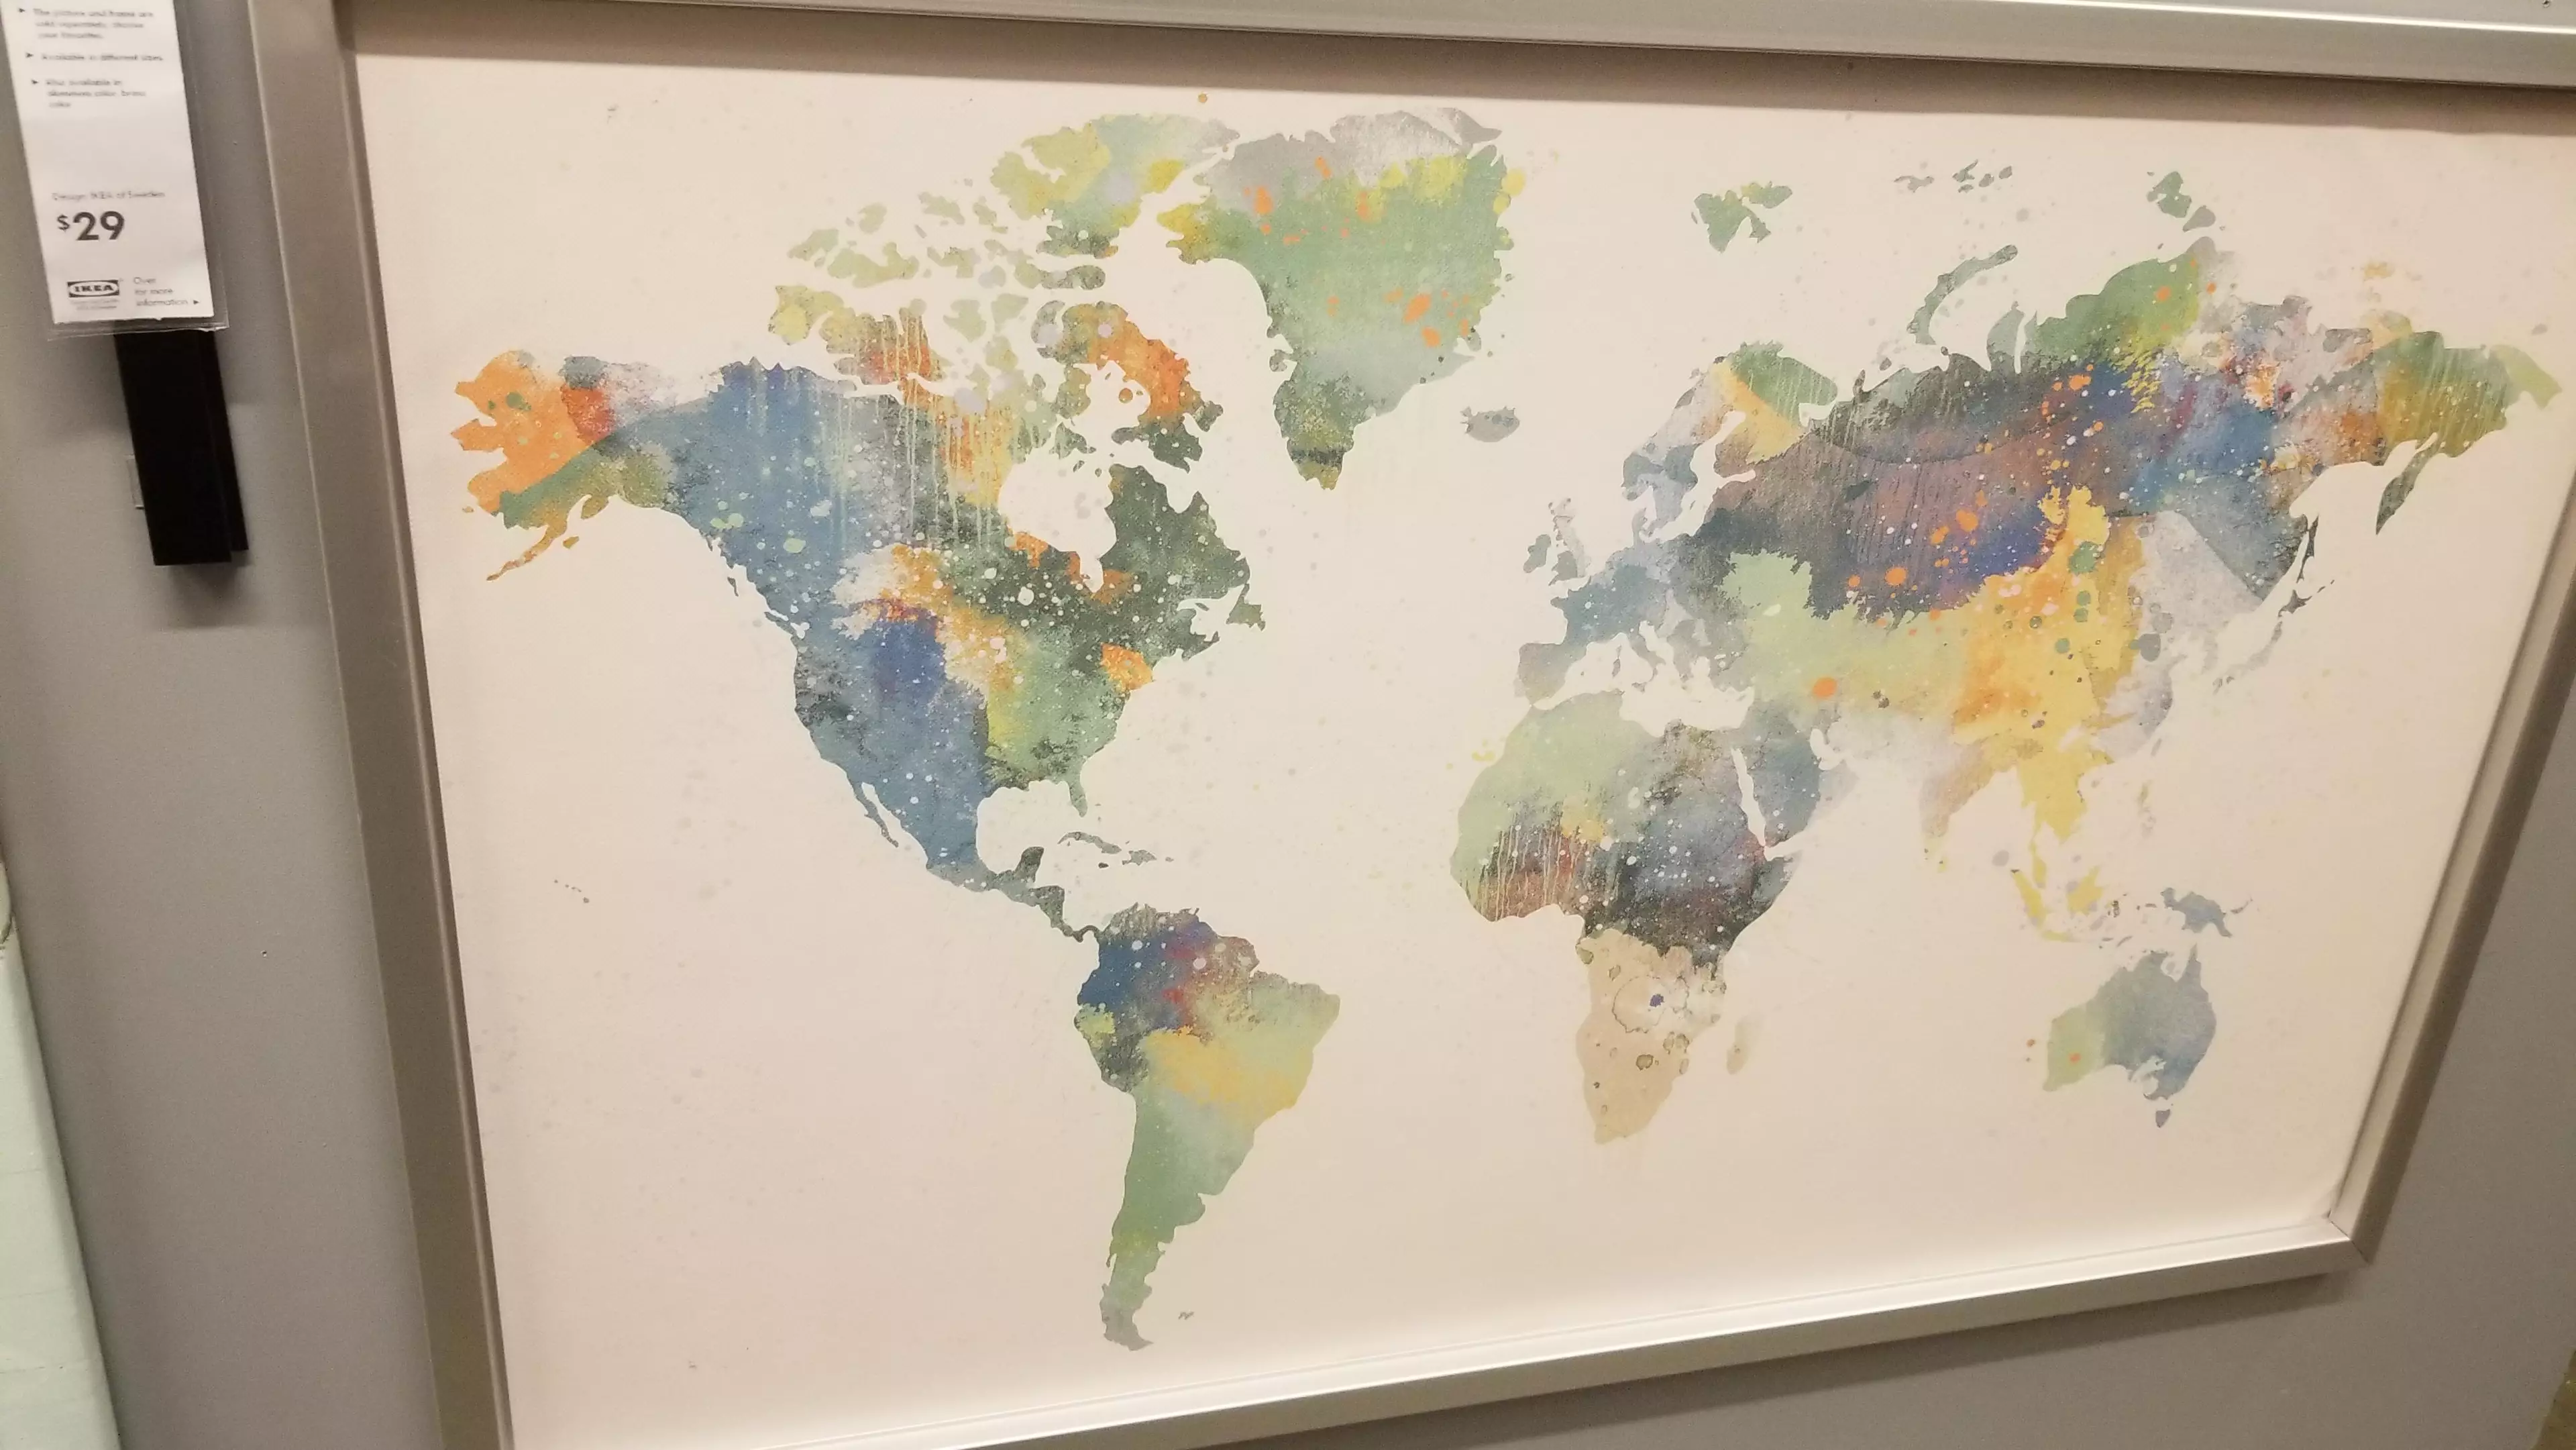 IKEA Is Being Trolled After Missing New Zealand Off The Map Of The World